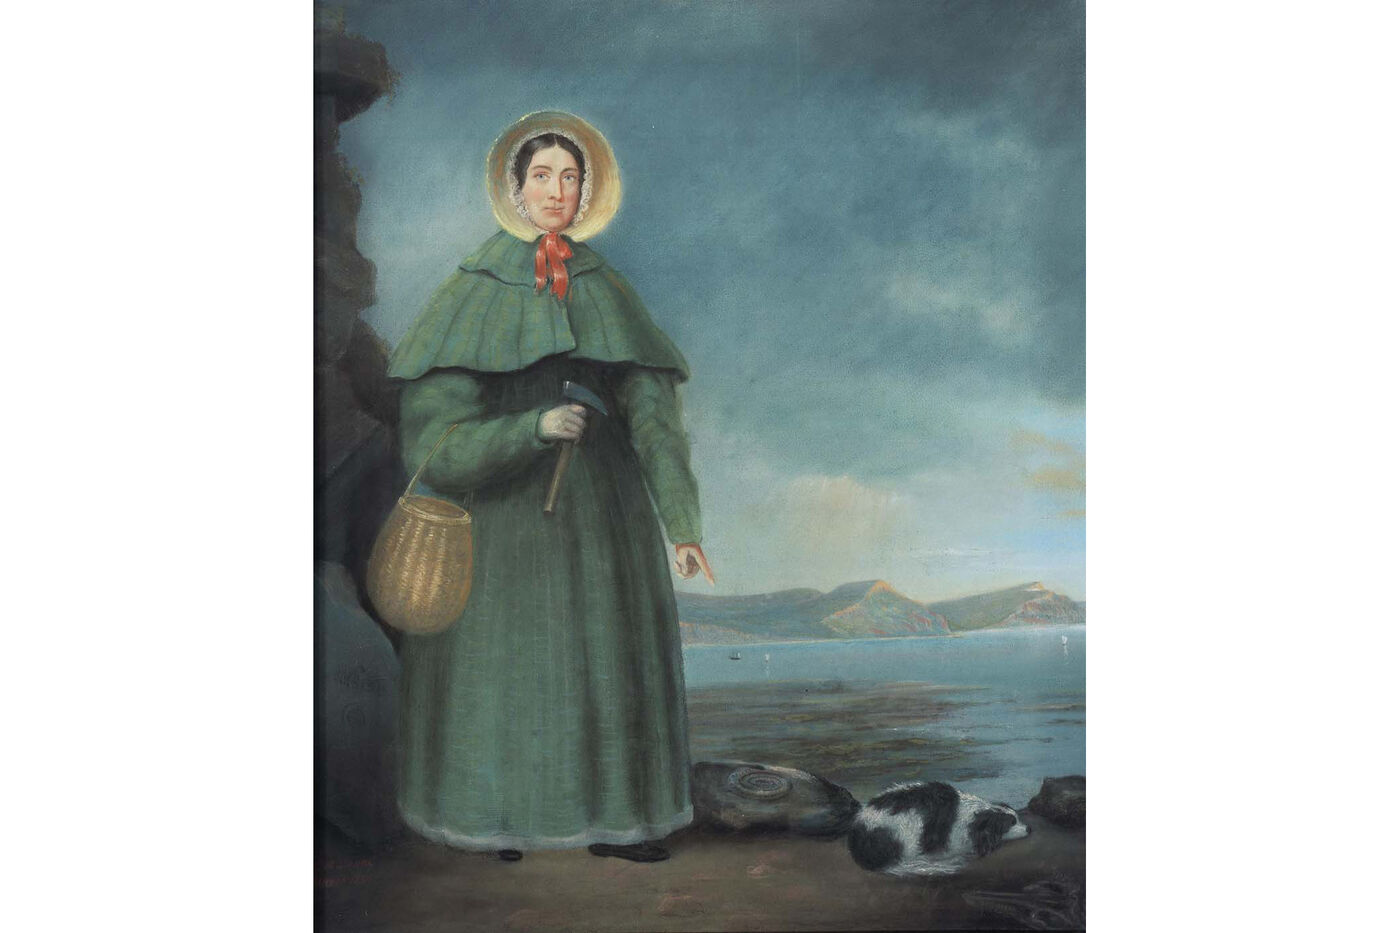 Portrait of a woman in a bonnet and long blue dress holding rock hammer, pointing at fossil next to a spaniel dog lying on the ground.